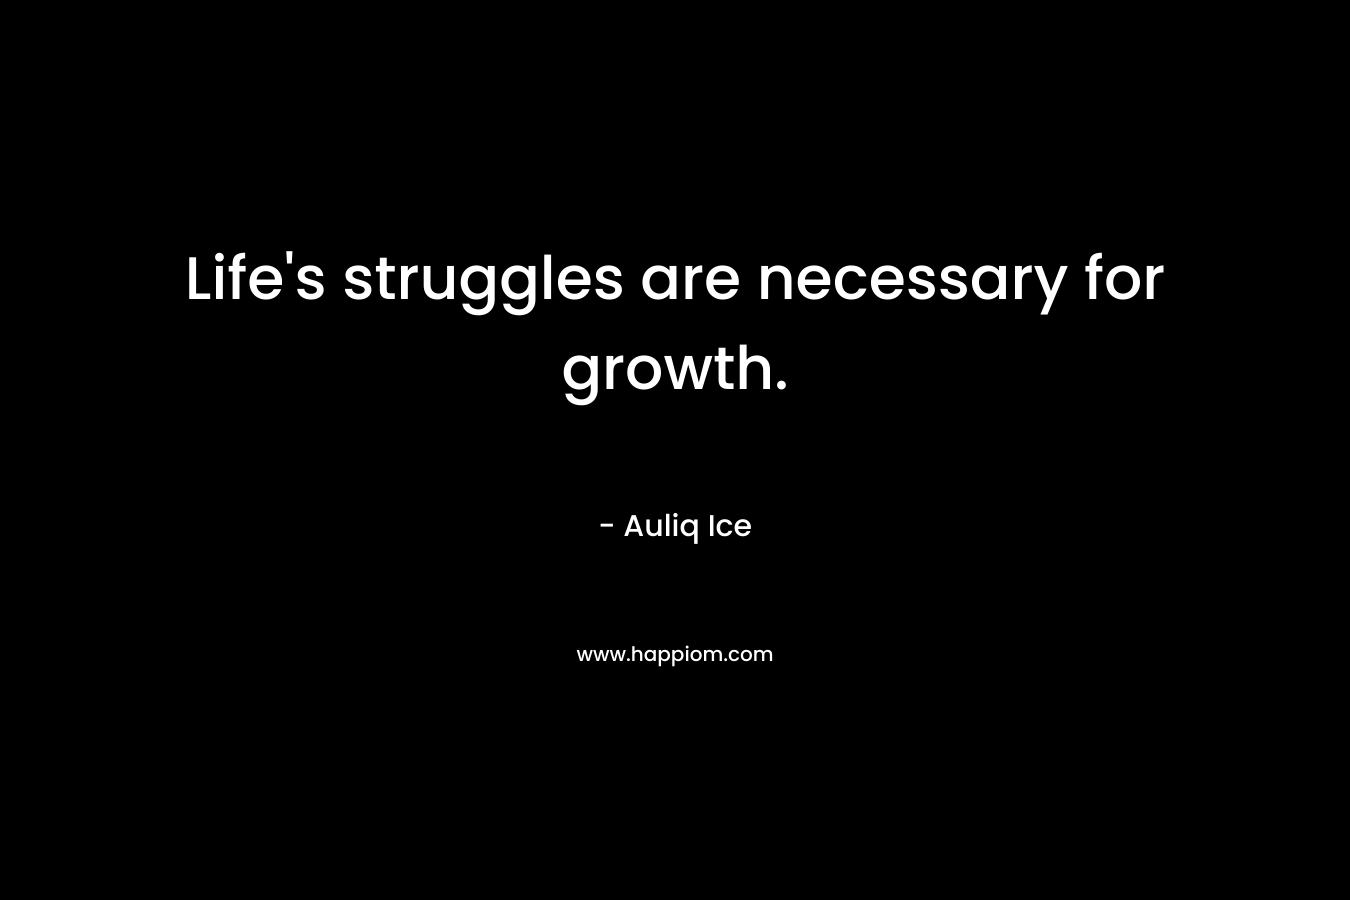 Life's struggles are necessary for growth.